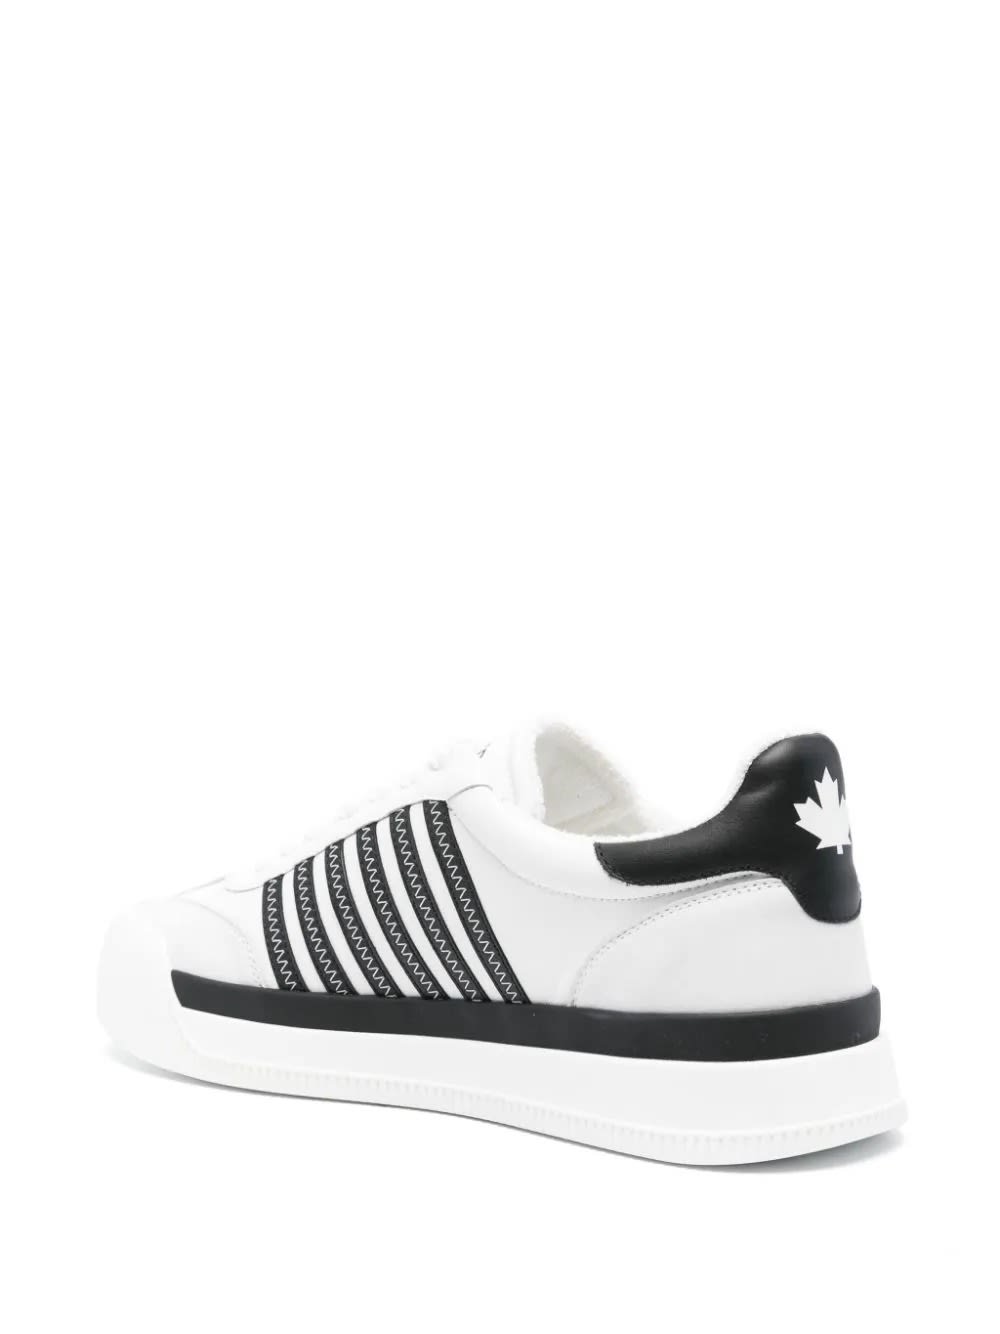 Shop Dsquared2 New Jersey Sneakers In White And Black